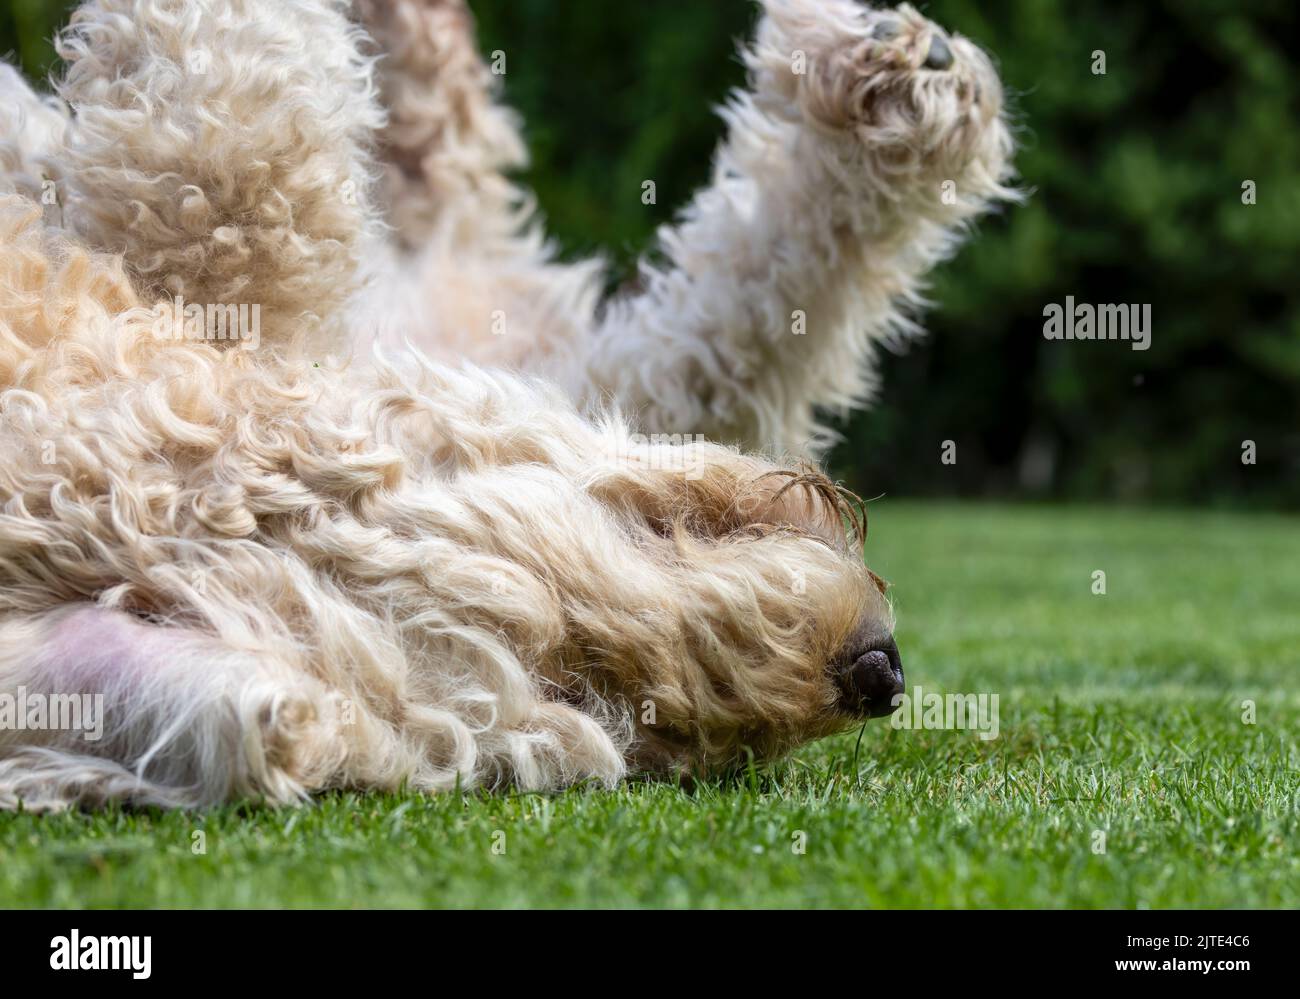 A close up of beautiful, curly haired beige coloured Labradoodle dog, rolling around and having fun, on some grass Stock Photo